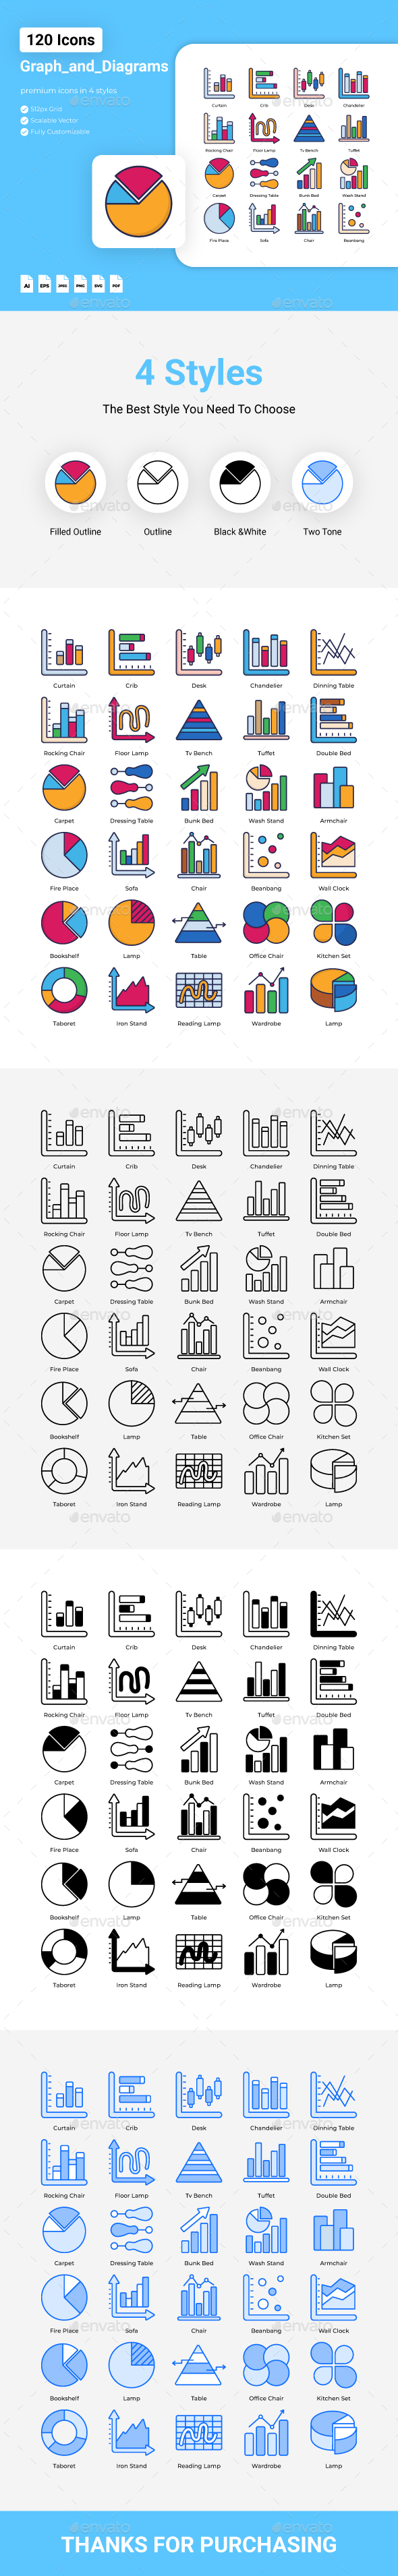 [DOWNLOAD]Graph and Diagrams Icons